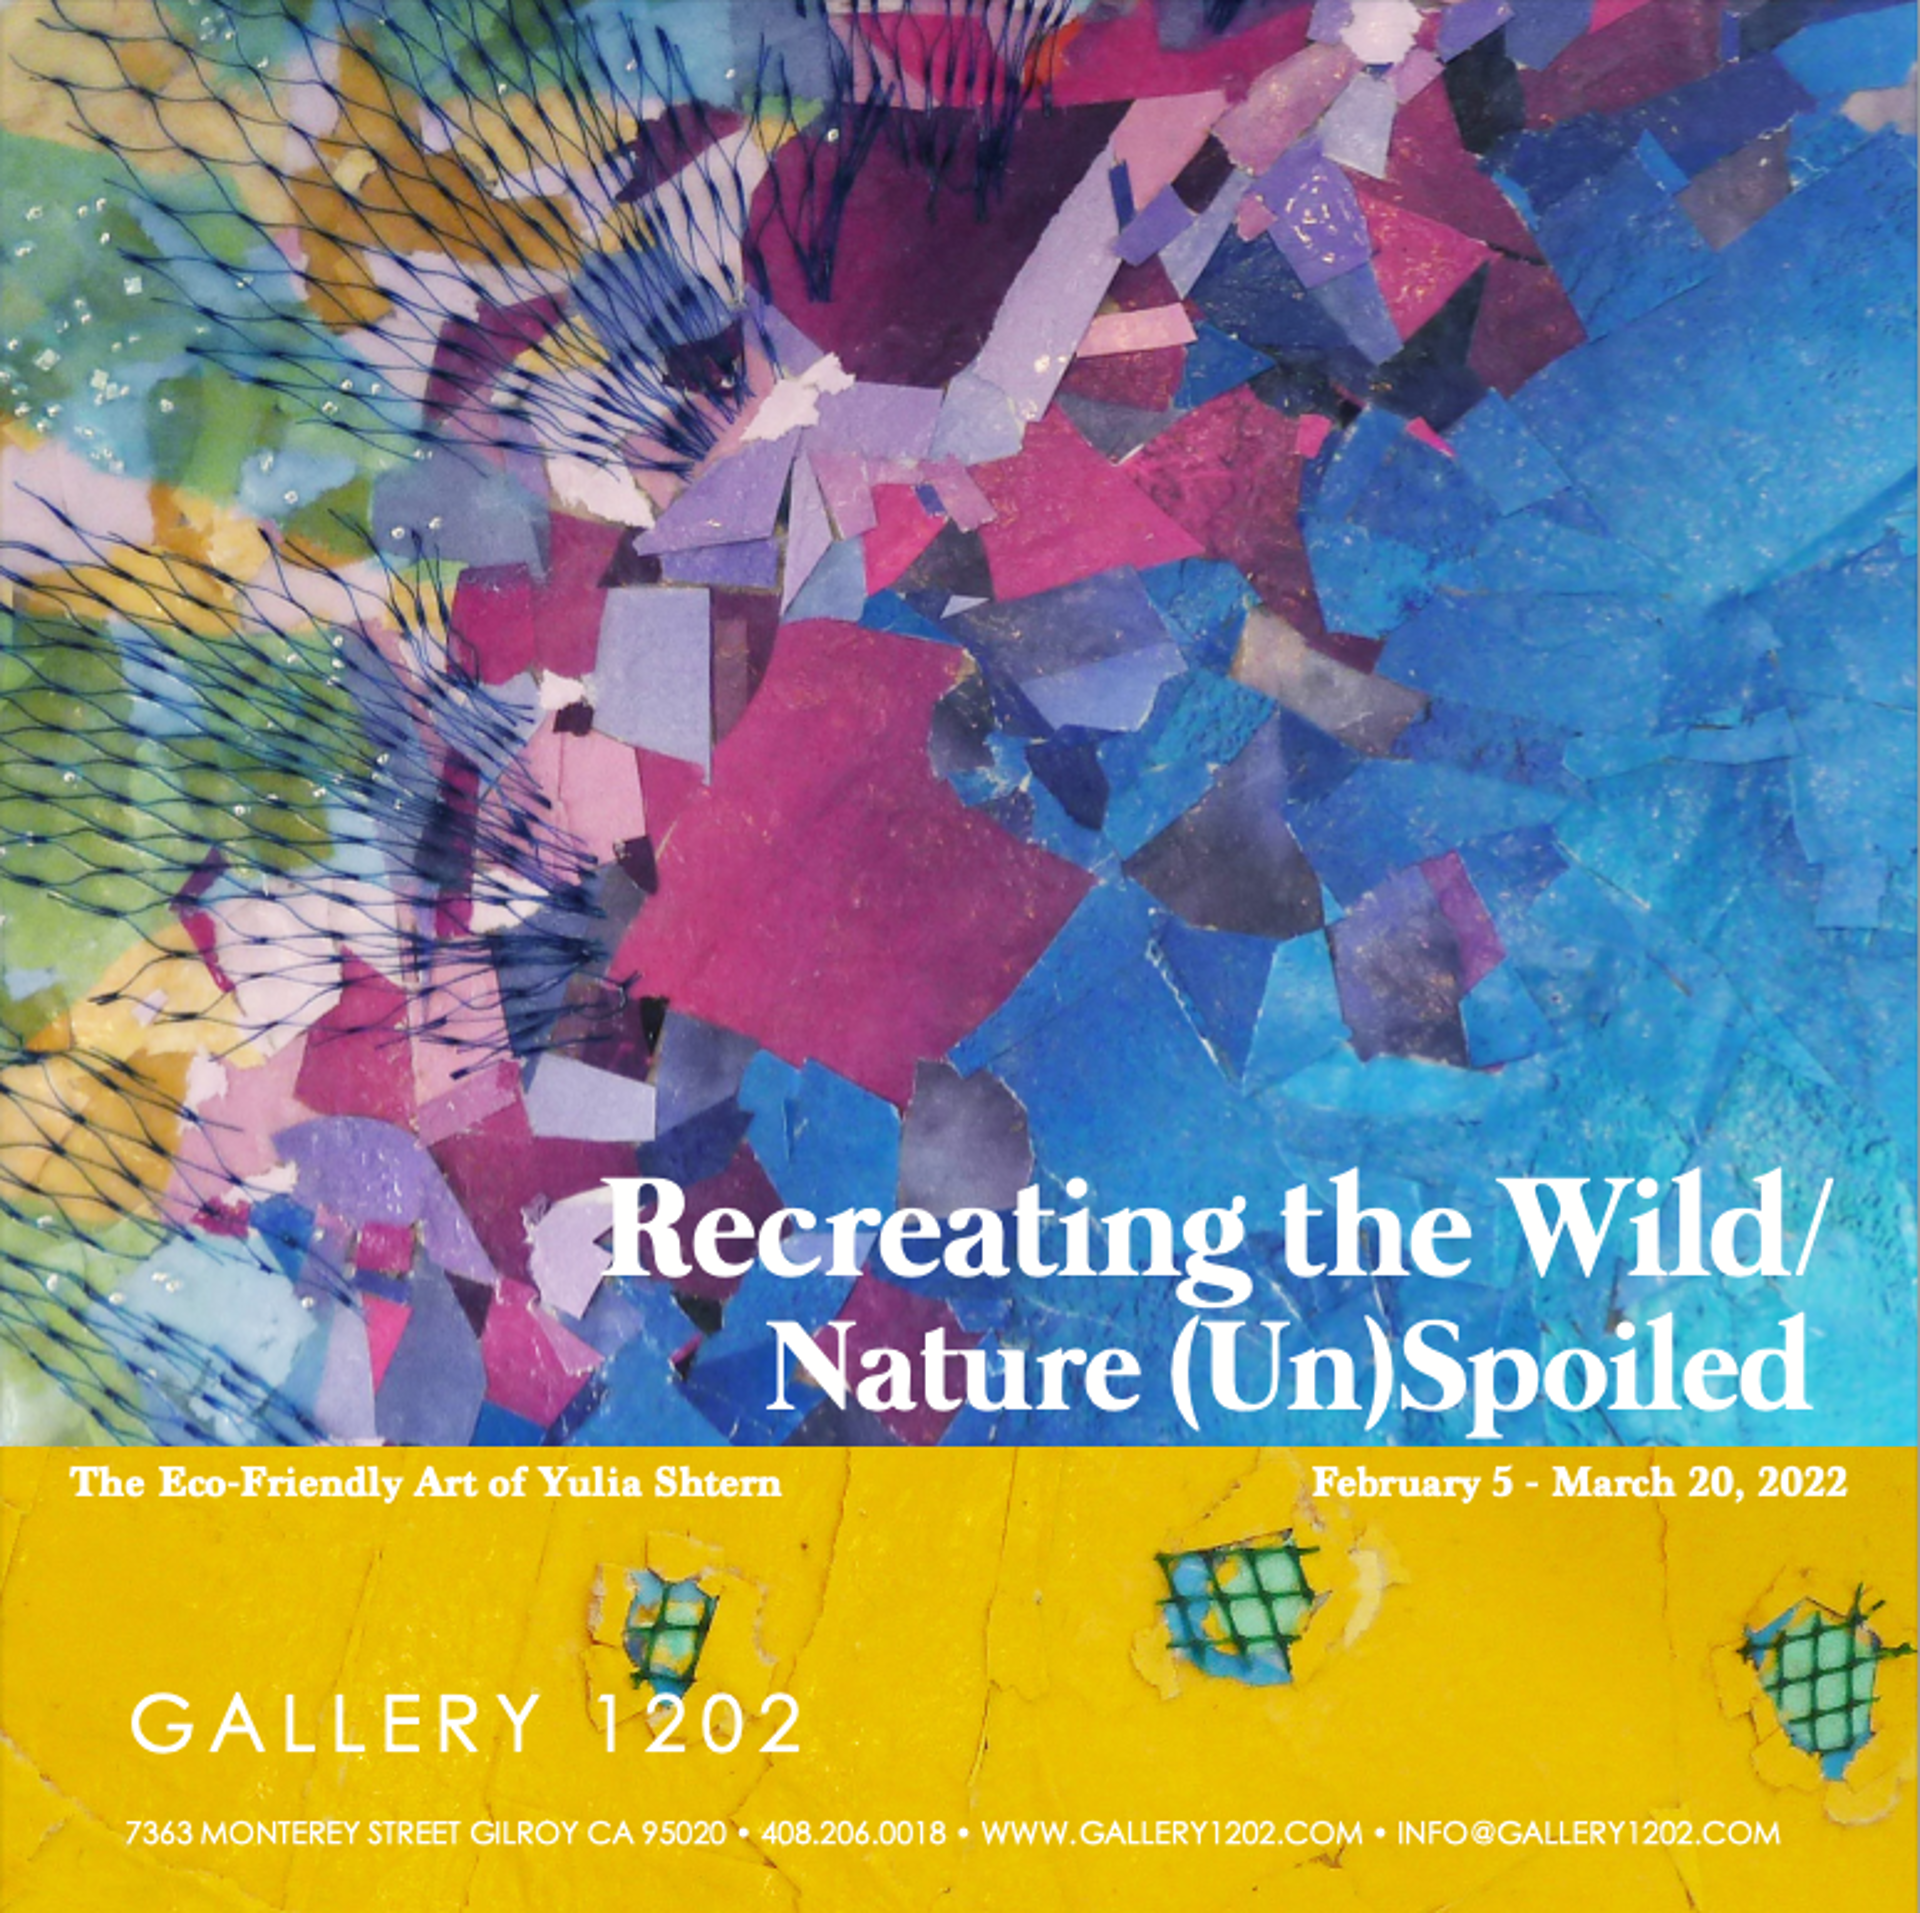 Recreating the Wild/Nature (Un)Spoiled by Yulia Shtern